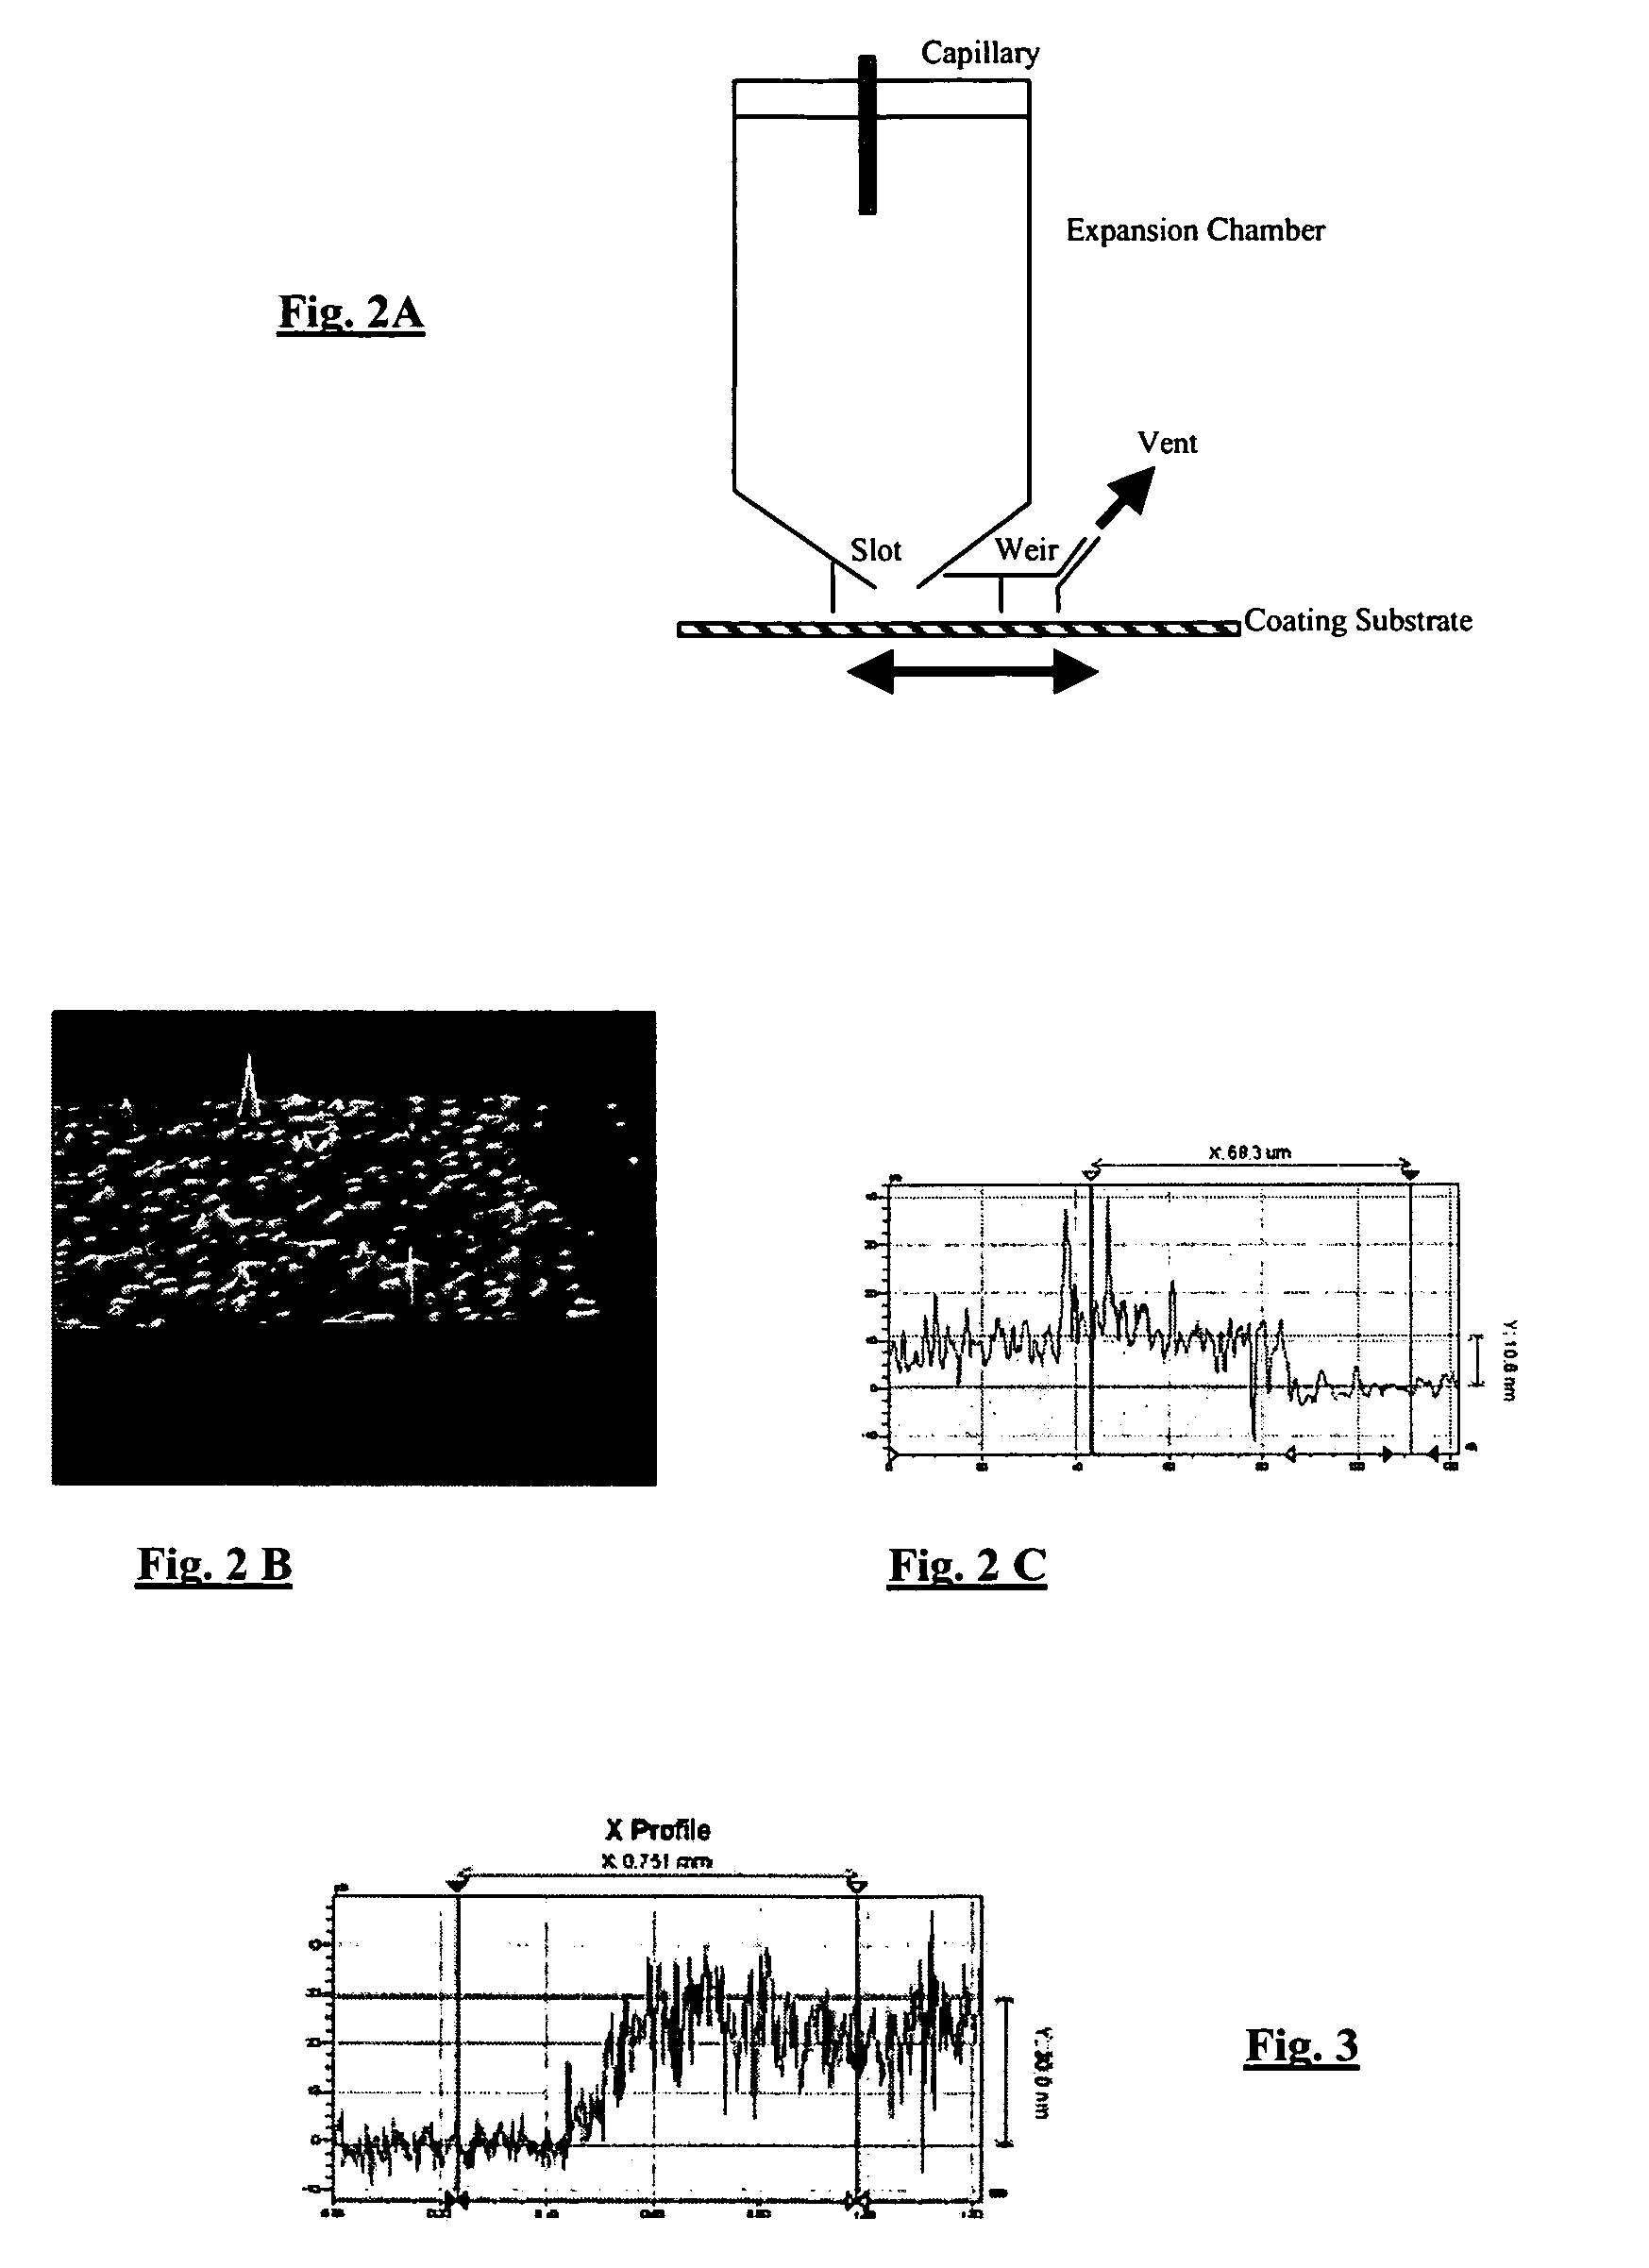 Process for the deposition of uniform layer of particulate material